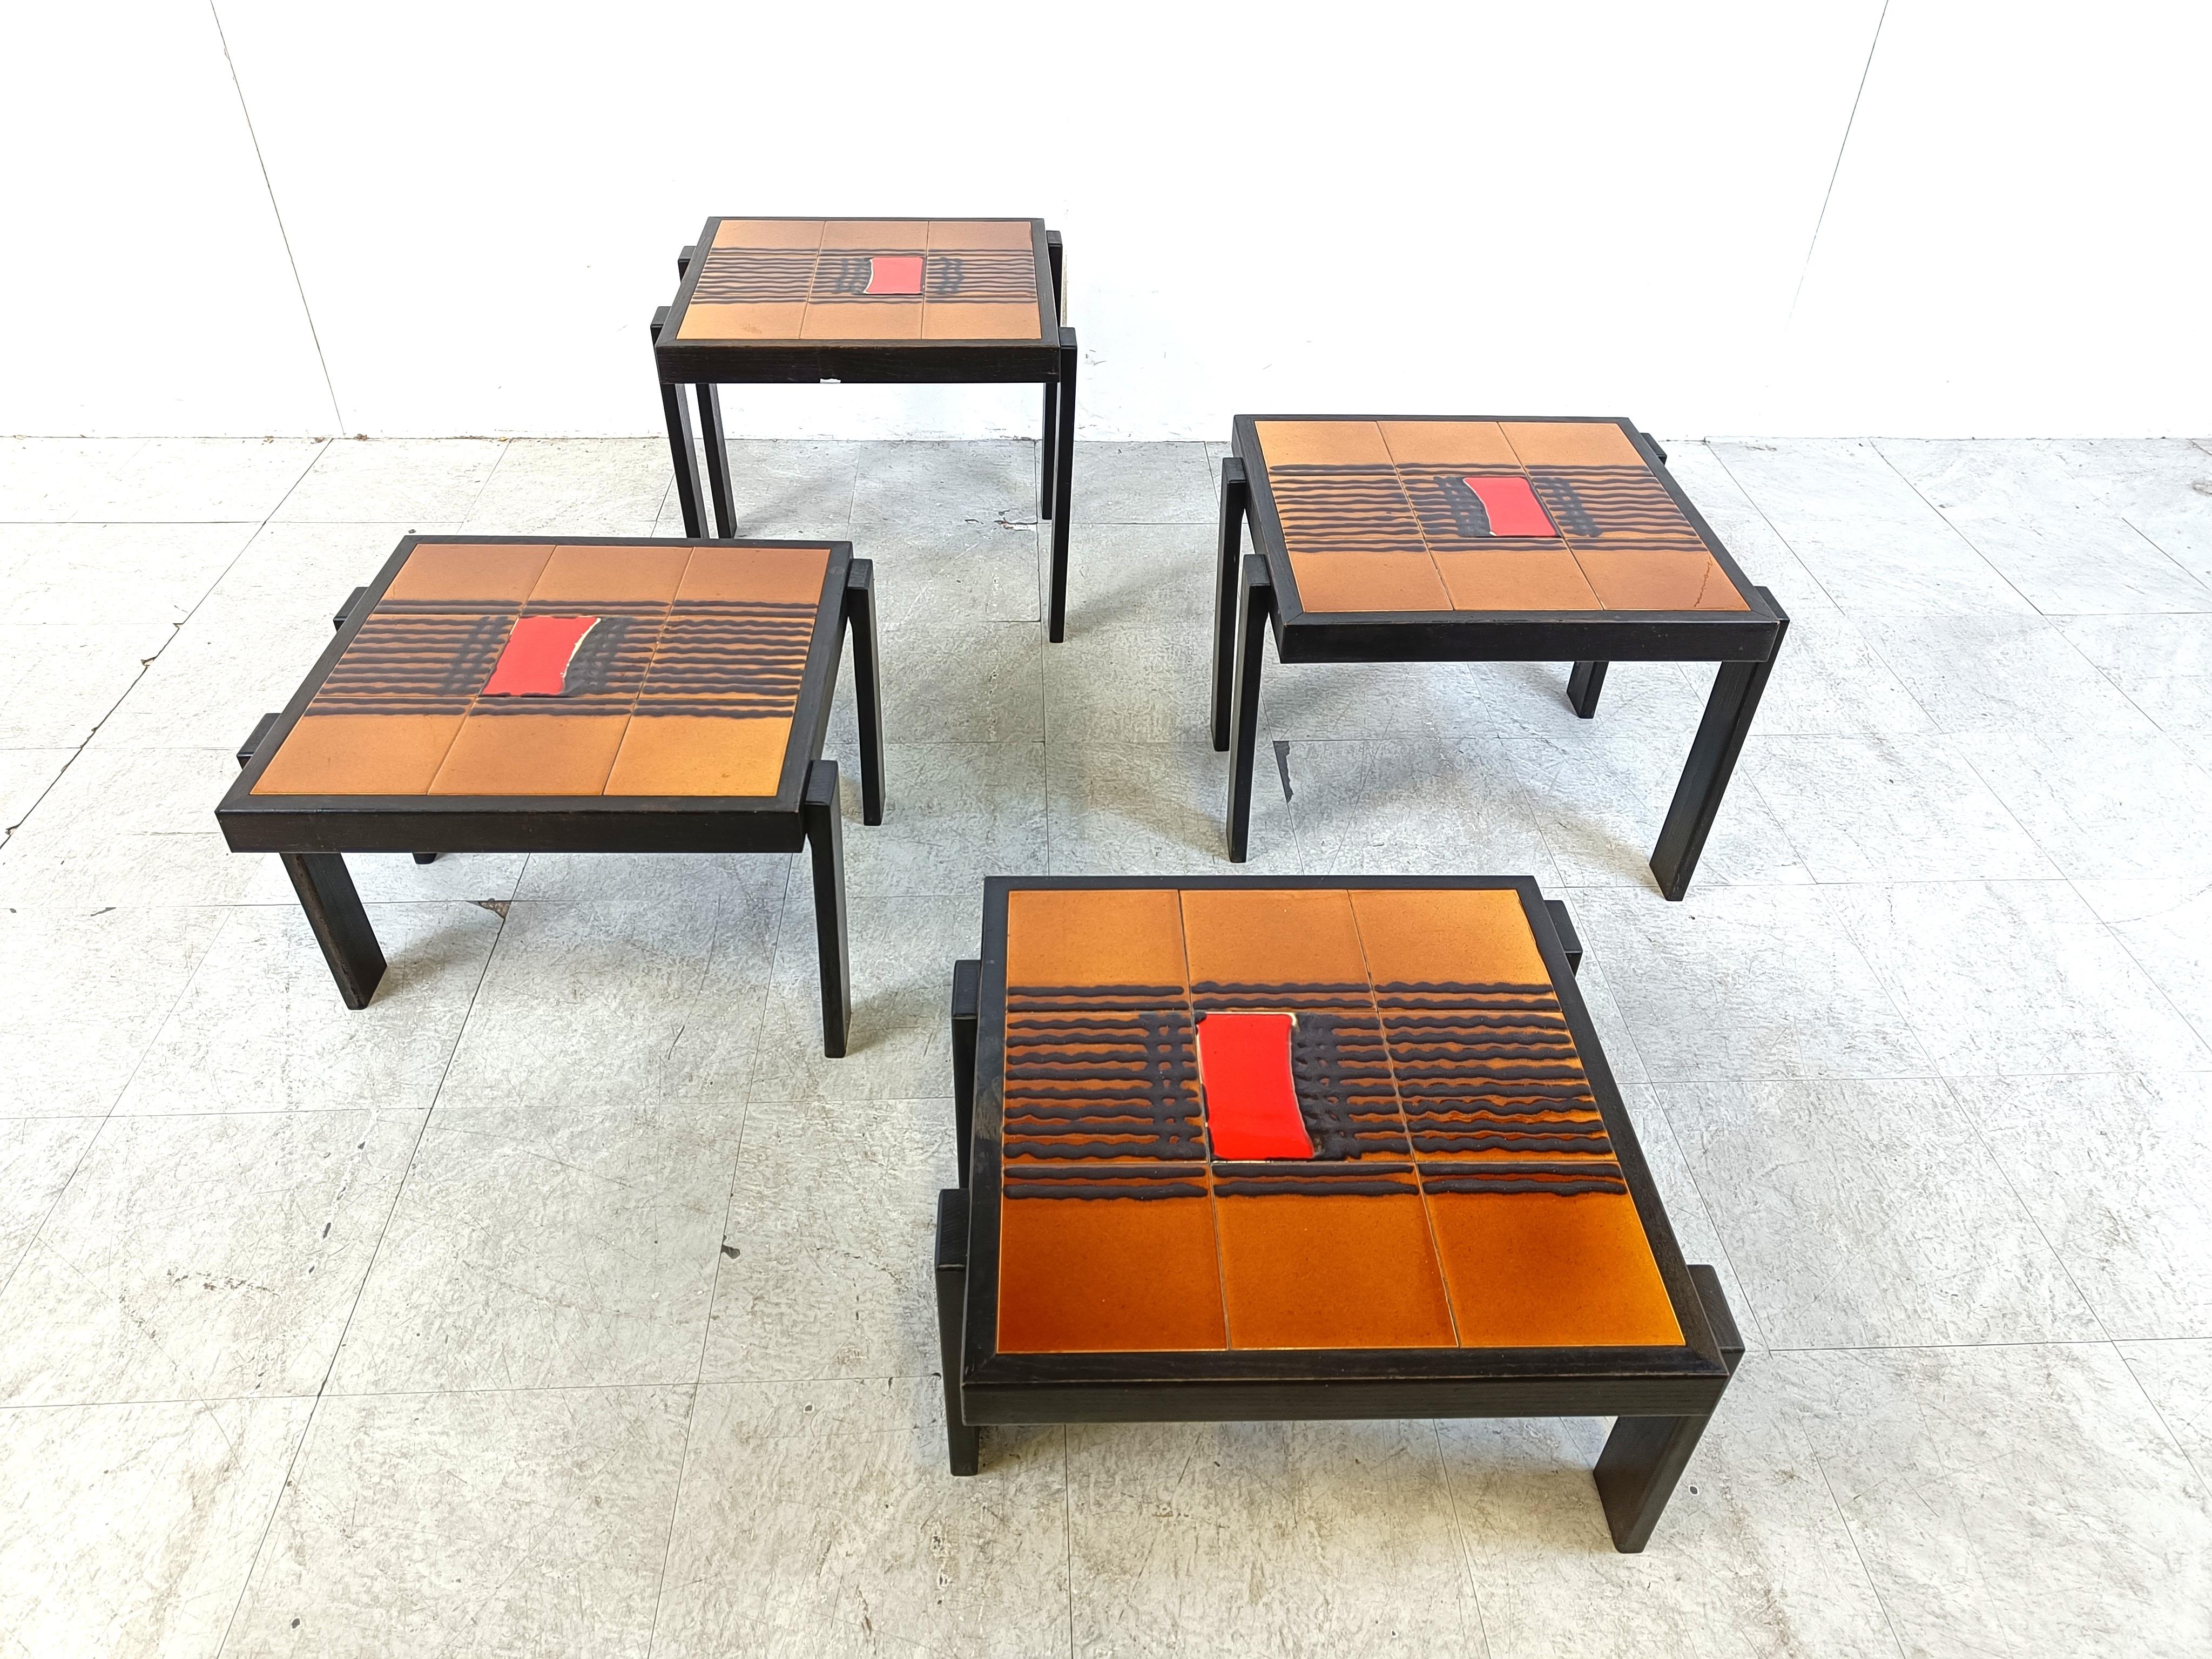 Set of 4 ceramic nesting tables with brown wooden frames.

Beautiful and very typical sixties ceramic tiling.

Great to contrast a very modern living room.

1960s - Belgium

Good condition

Dimensions:
Largest table: 
Height: 46cm
Width: 55cm
Depth: